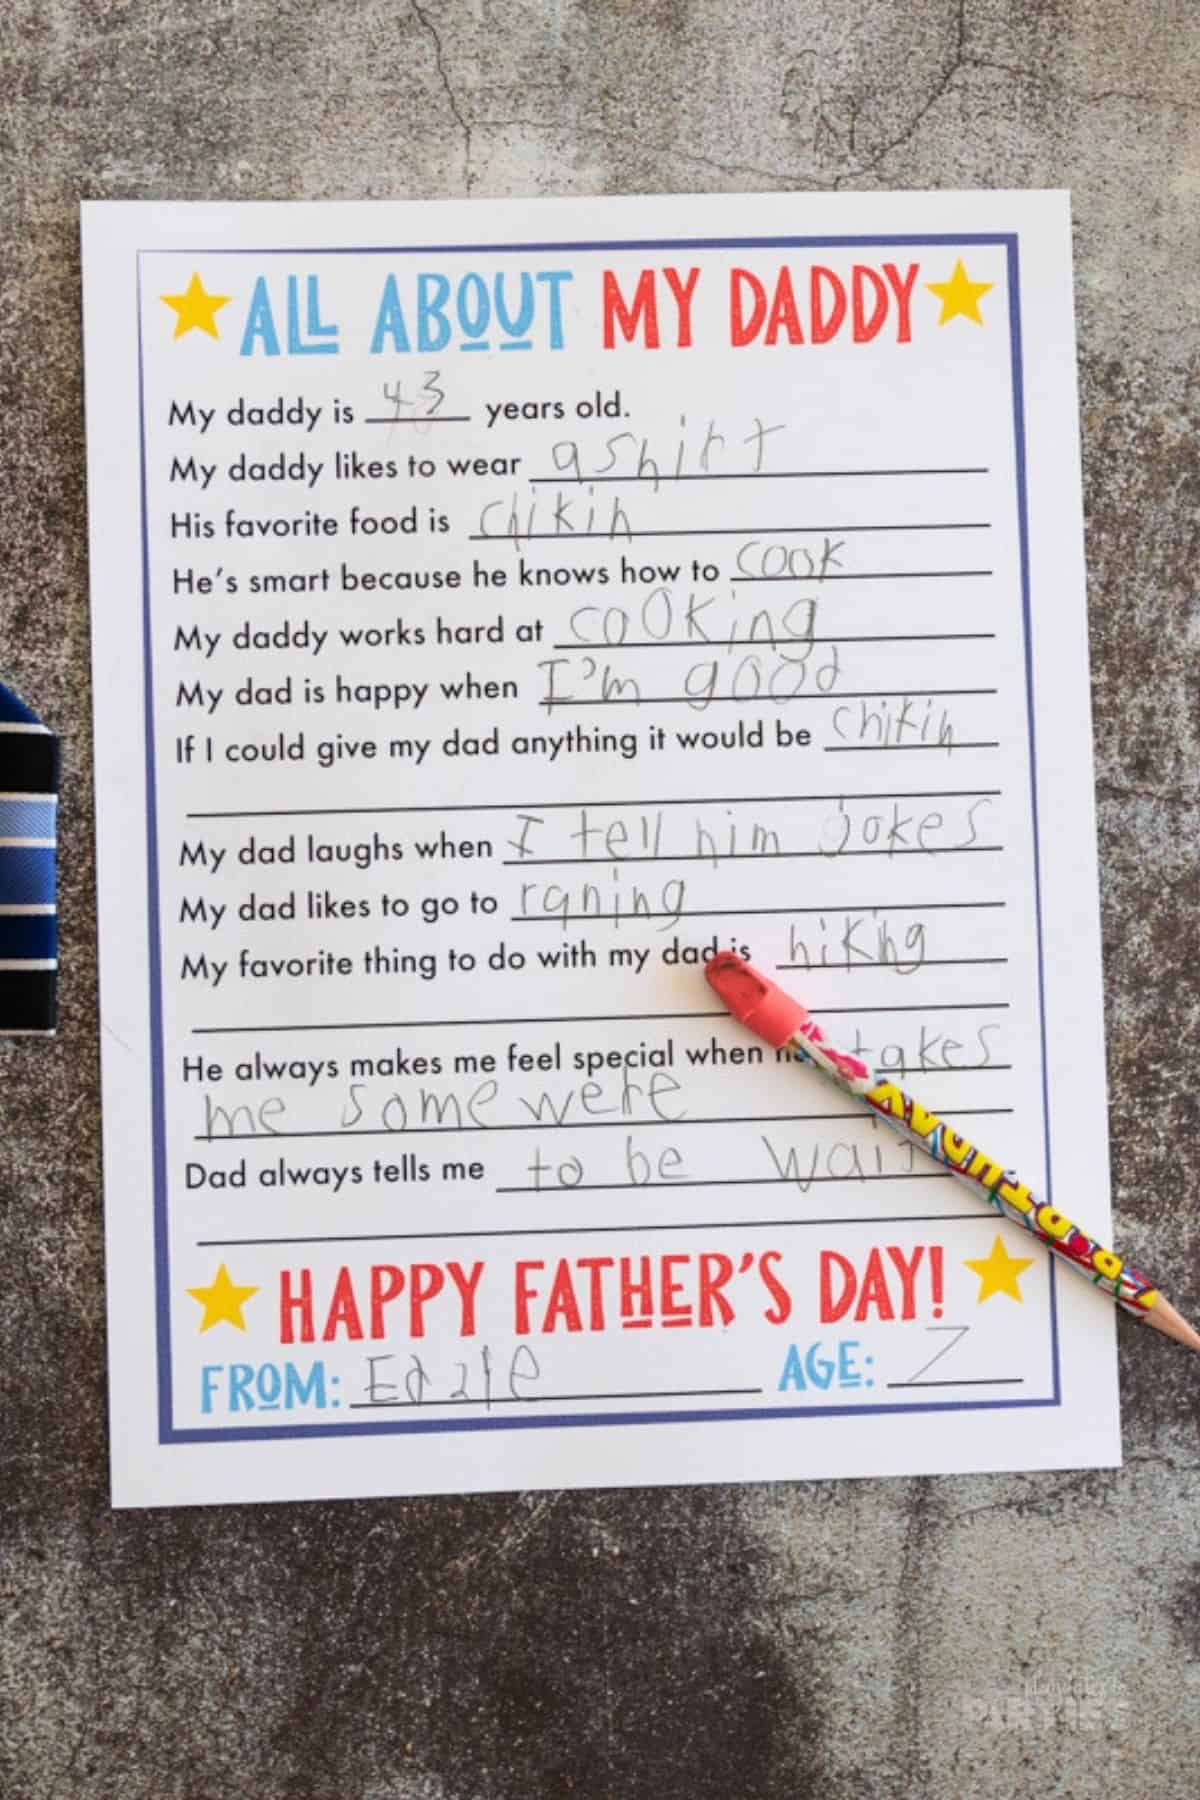 All about dad printable interview on a concrete surface.